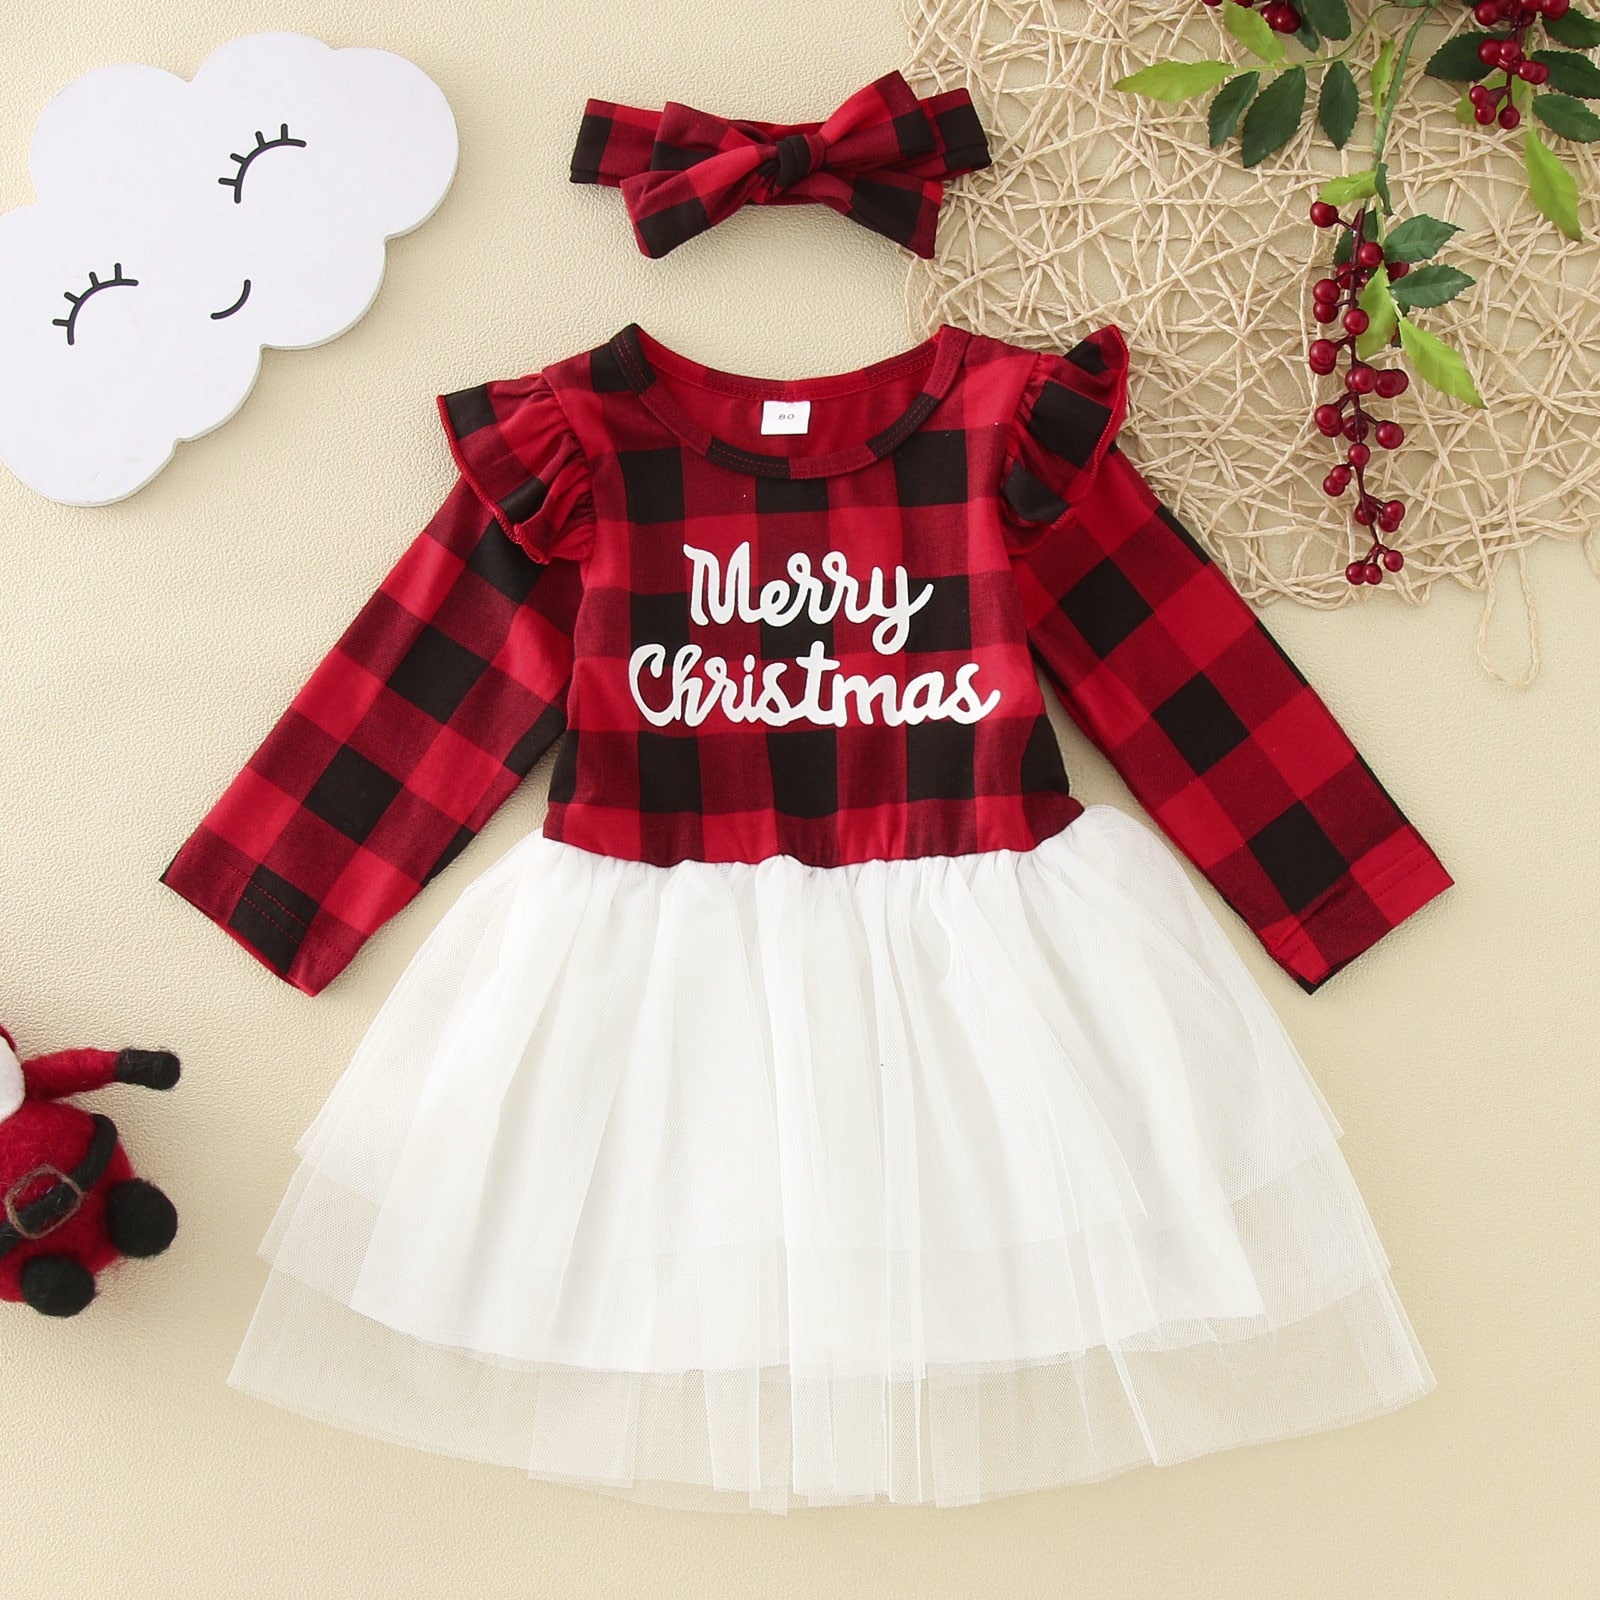 Kids Baby Girl Mesh Tutu Dress - Long Sleeve Red and Black Plaid Dress for Christmas Party and Spring/Fall